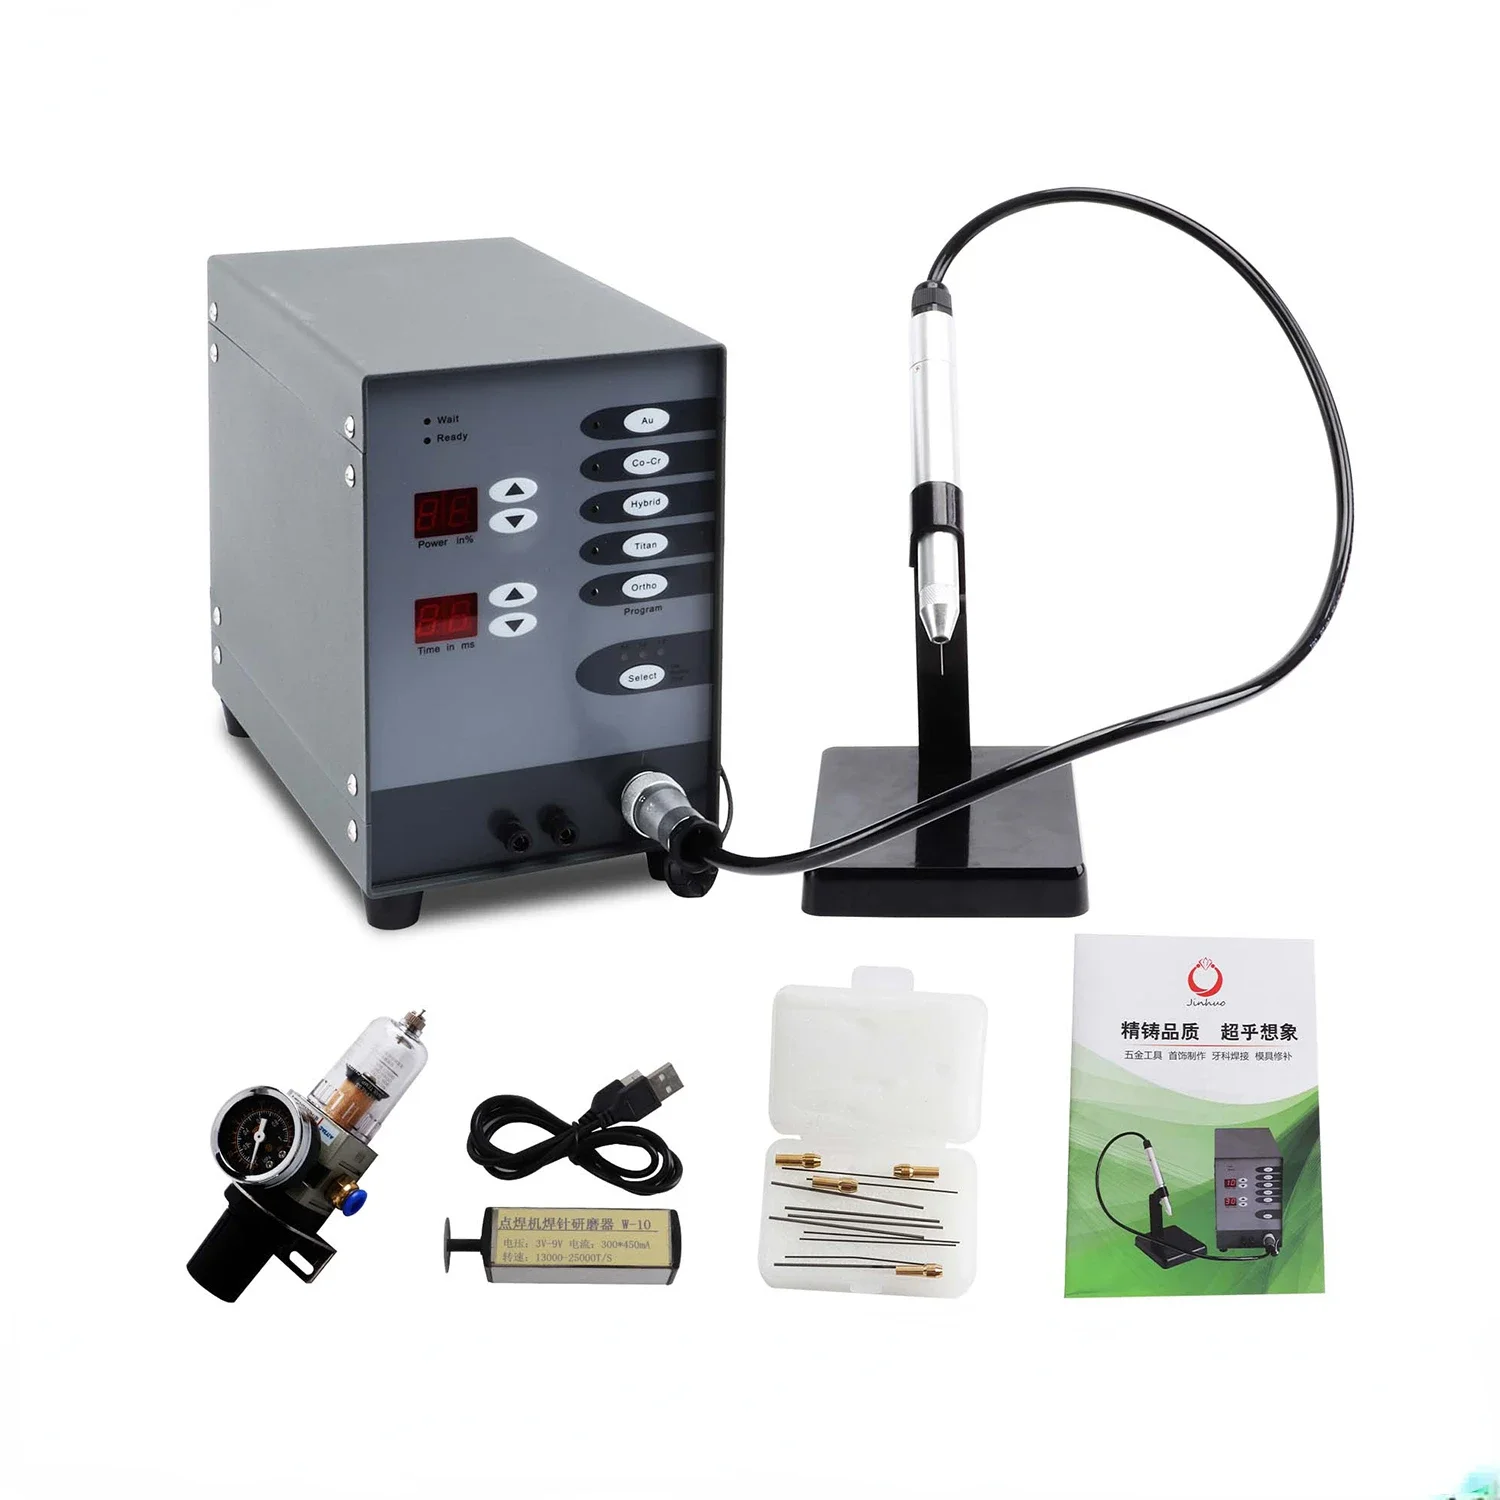 

Stainless Steel Spot Laser Welding Machine 110V/220V Automatic Numerical Control Pulse Argon Arc Welder for Soldering Jewelry